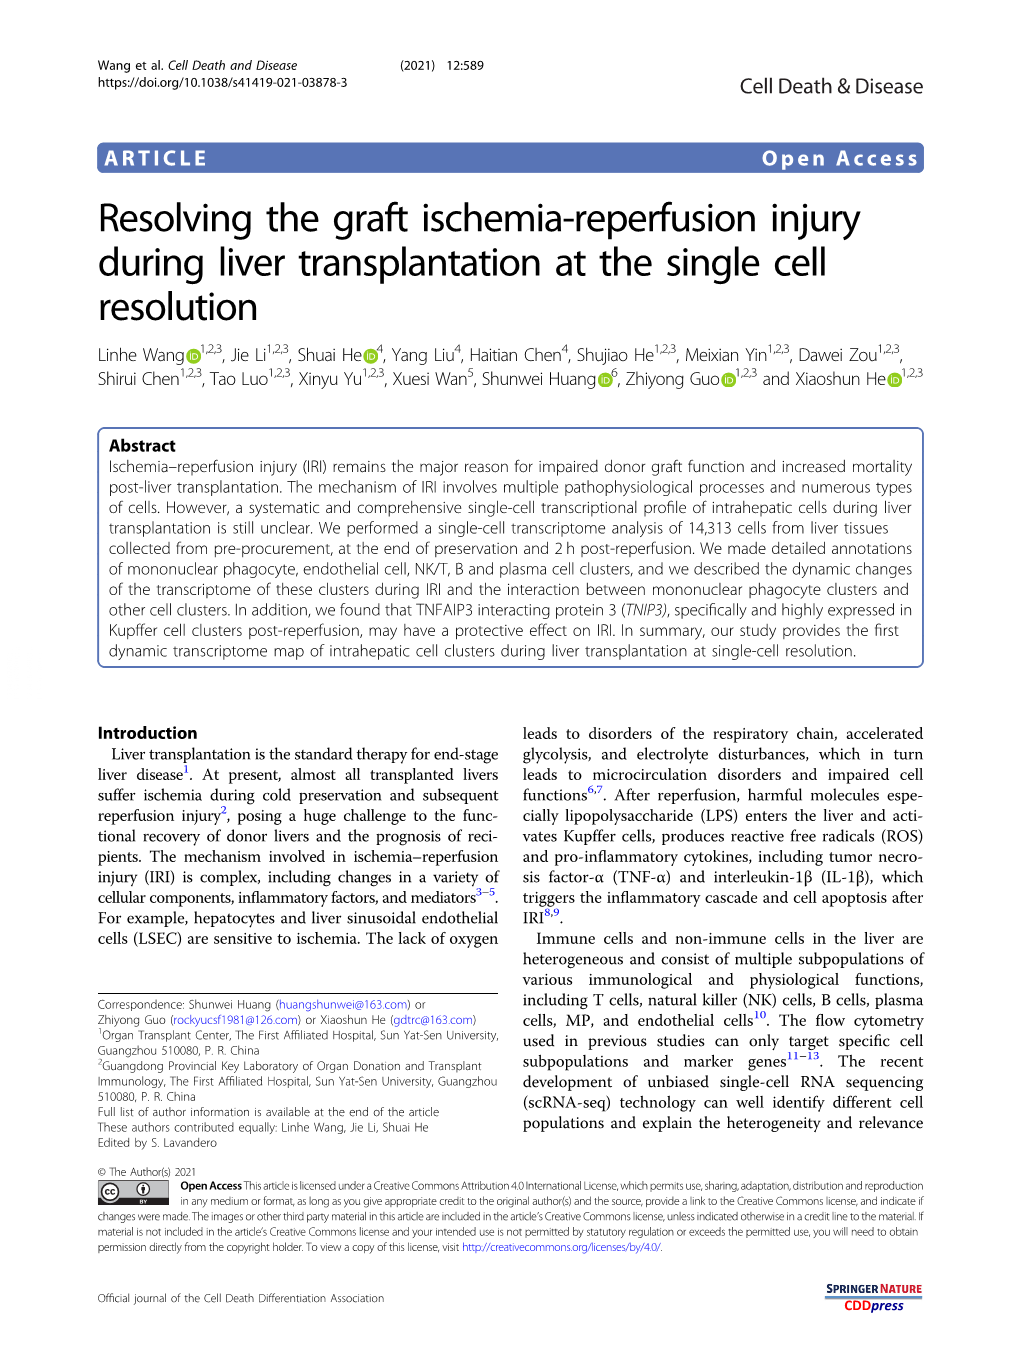 Resolving the Graft Ischemia-Reperfusion Injury During